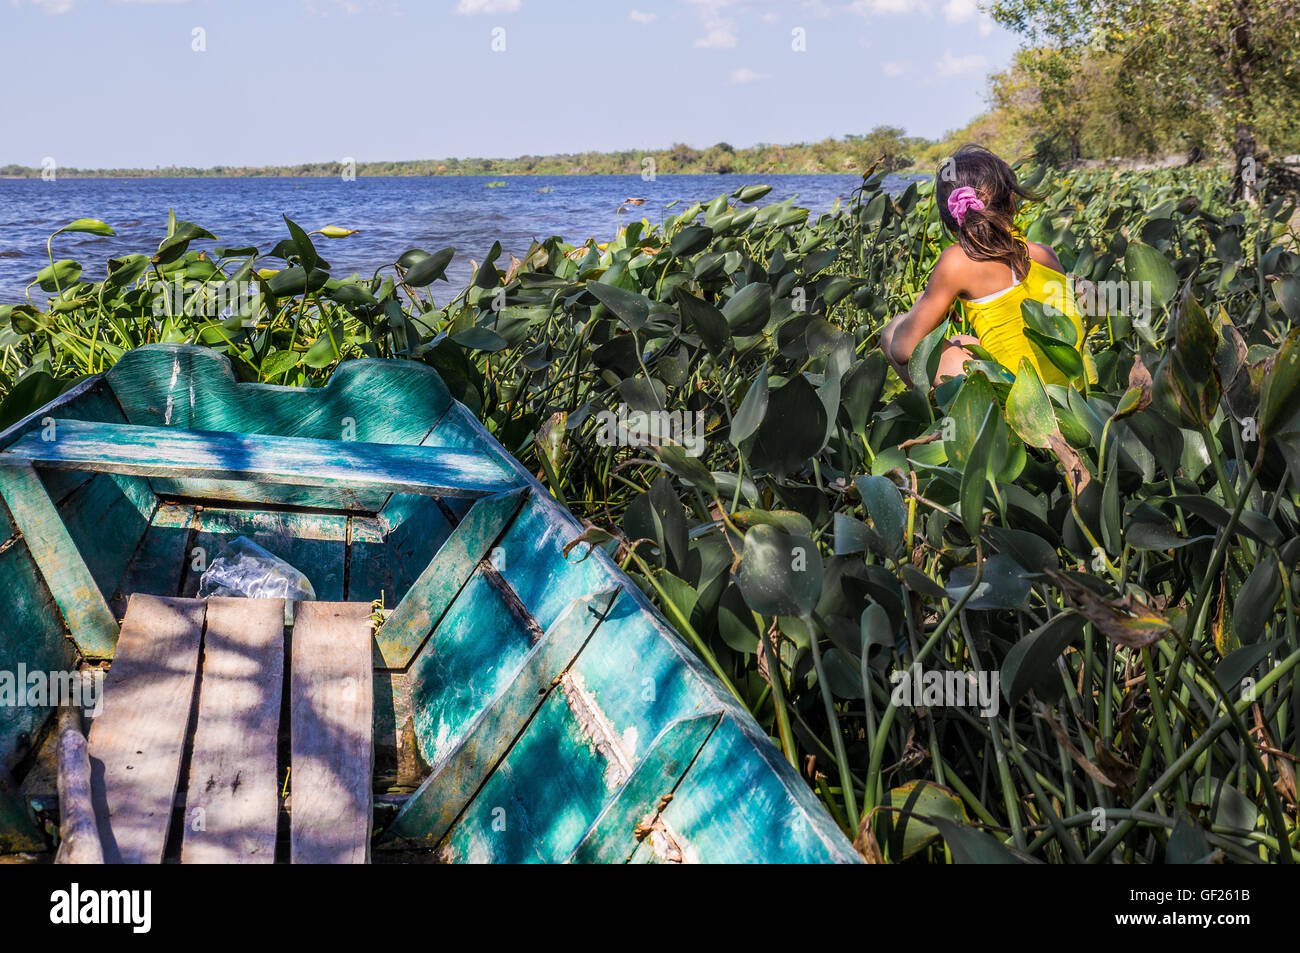 Puerto Pollo, Paraguay on August 8, 2015: An indigenous girl sitting next to a small fishermen's boat in Puerto Pollo at Rio Par Stock Photo